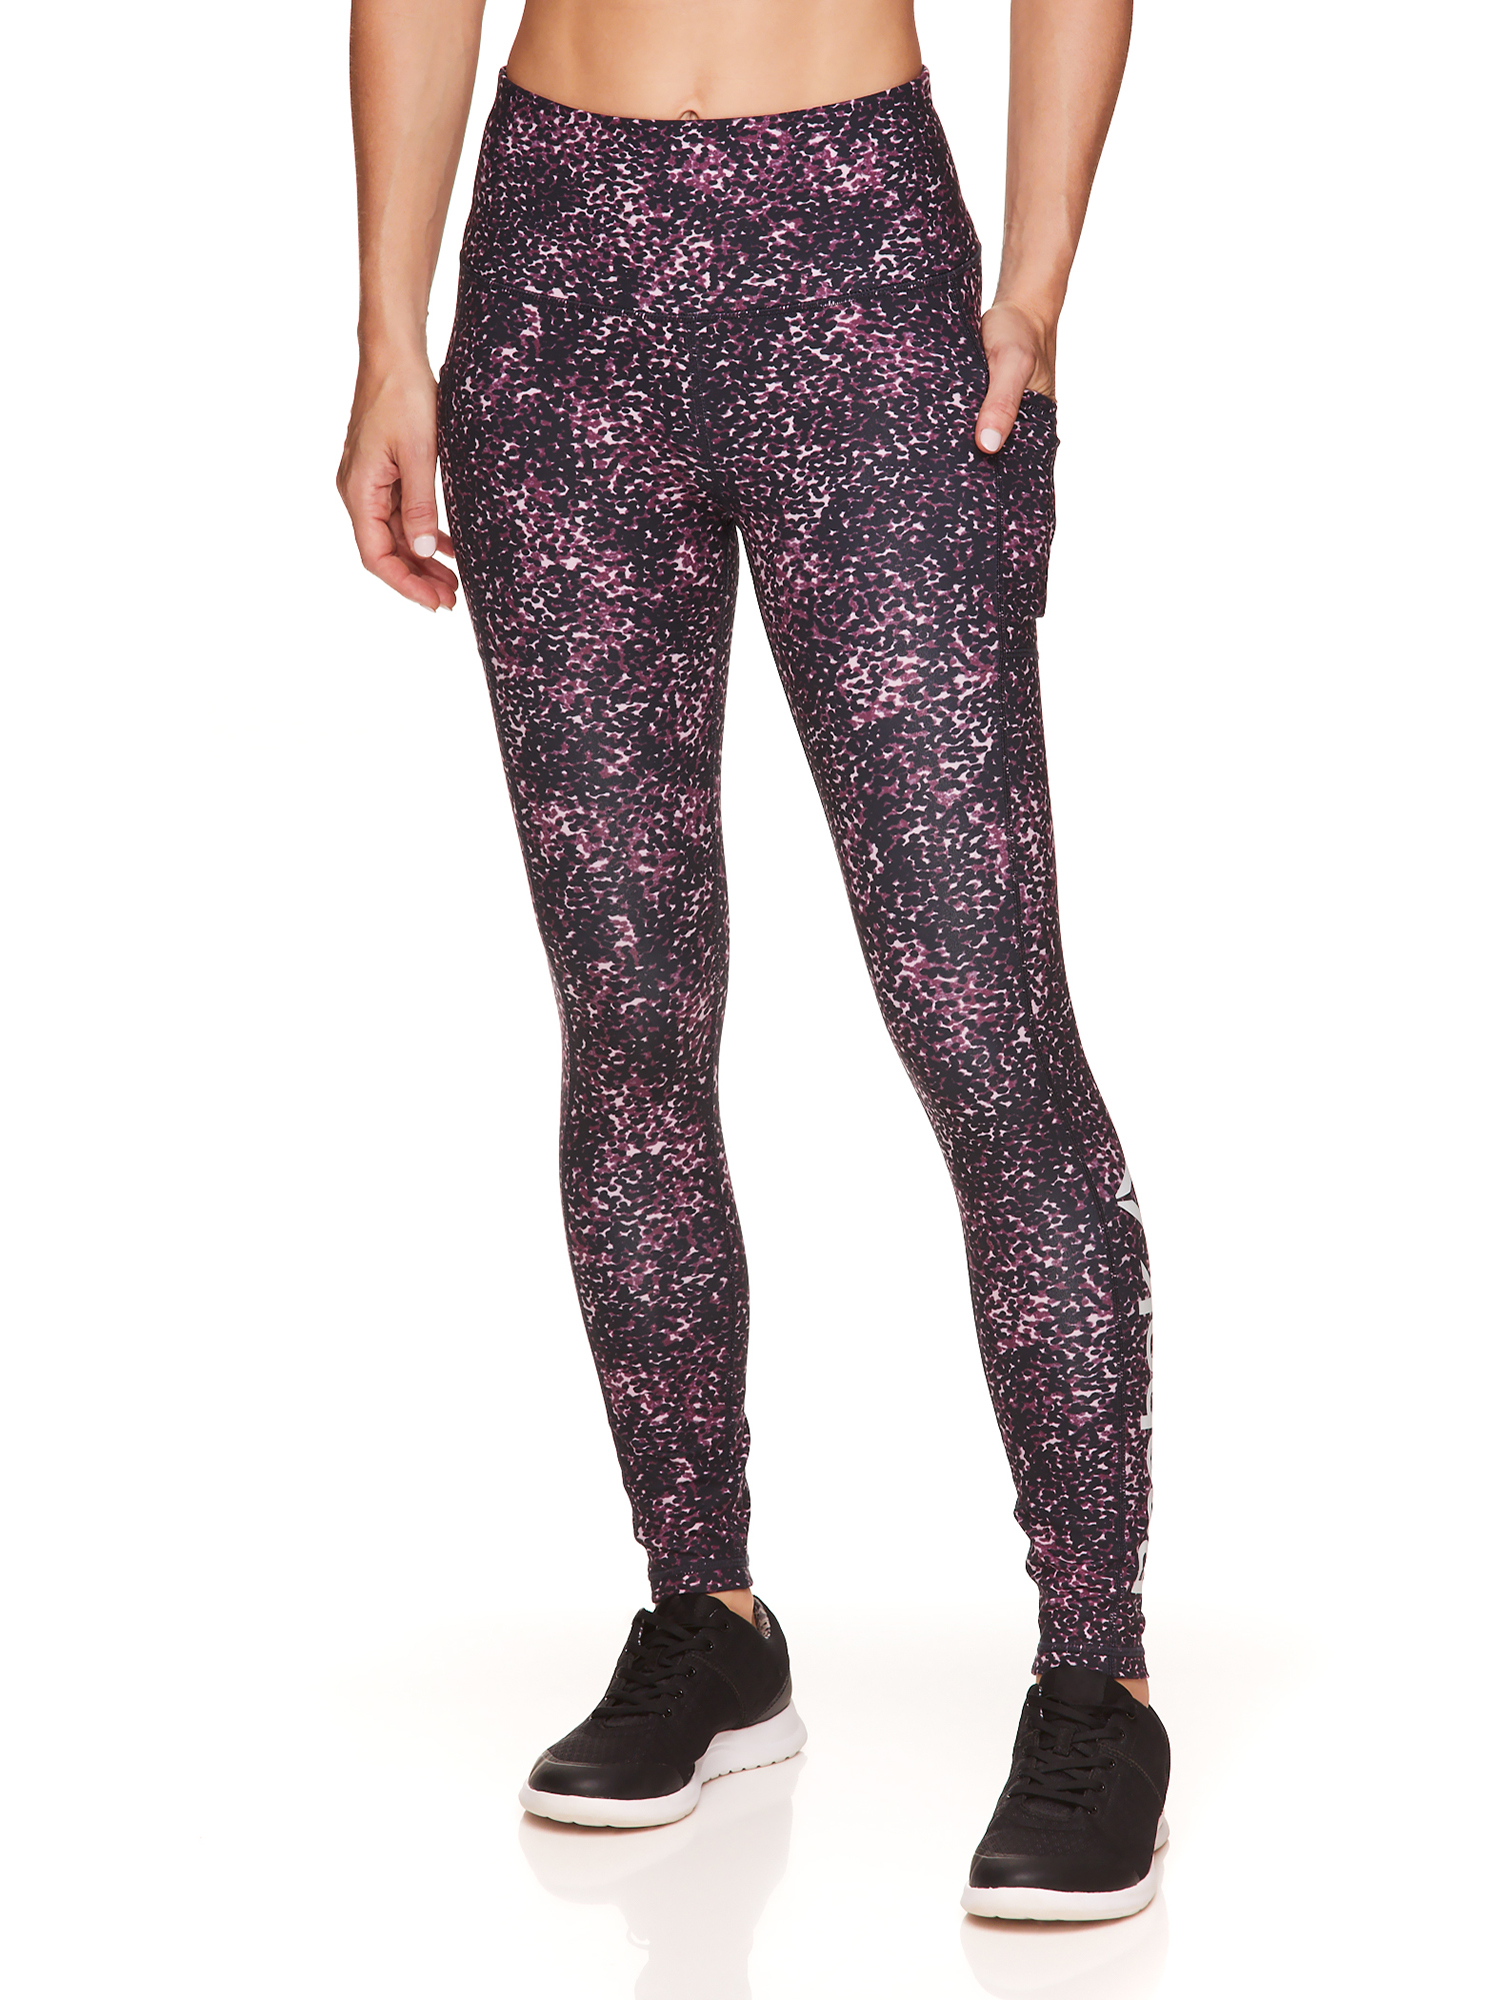 Reebok Womens High-Waisted Active Leggings with Pockets, Dotty Animal Graphic - image 1 of 4